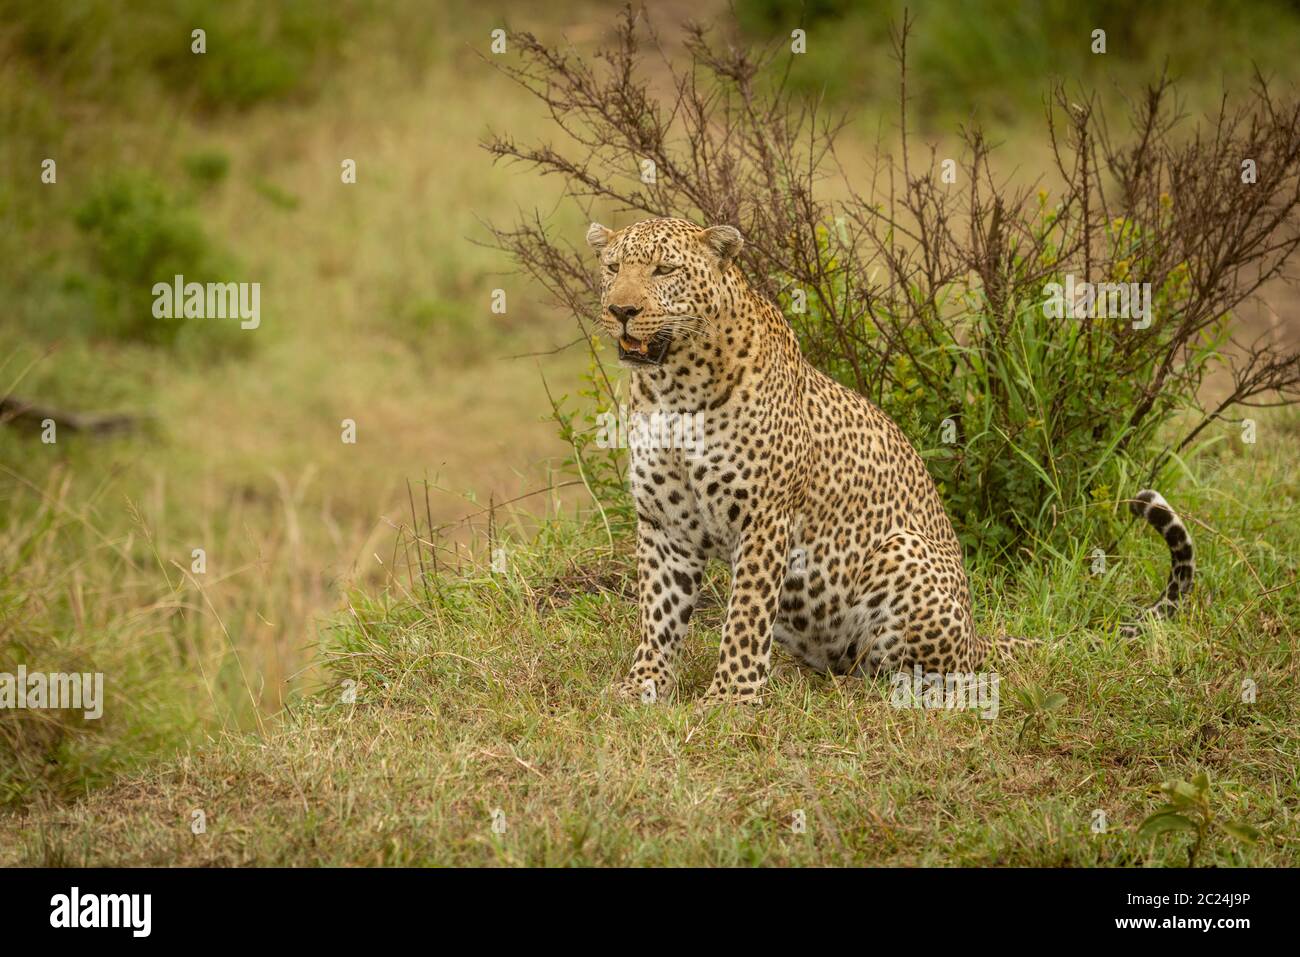 Leopard sits looking left with bush behind Stock Photo